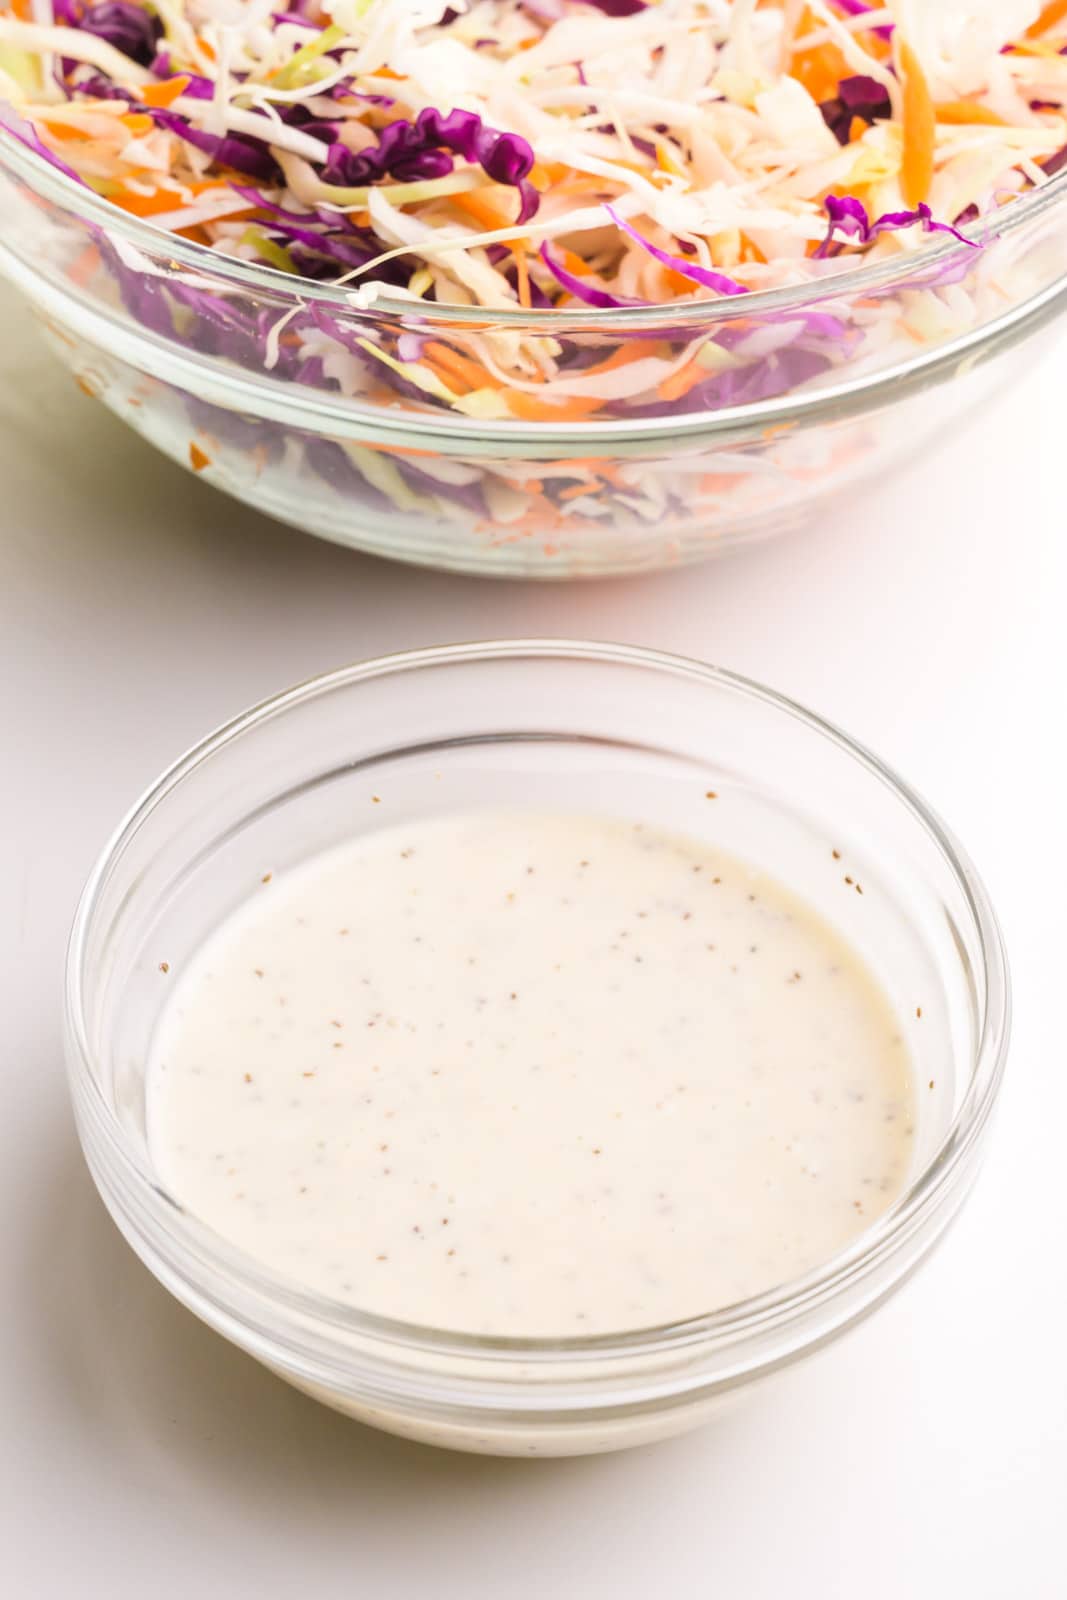 A bowl of creamy coleslaw sauce sits in front of a larger bowl full of shredded cabbage and carrots.